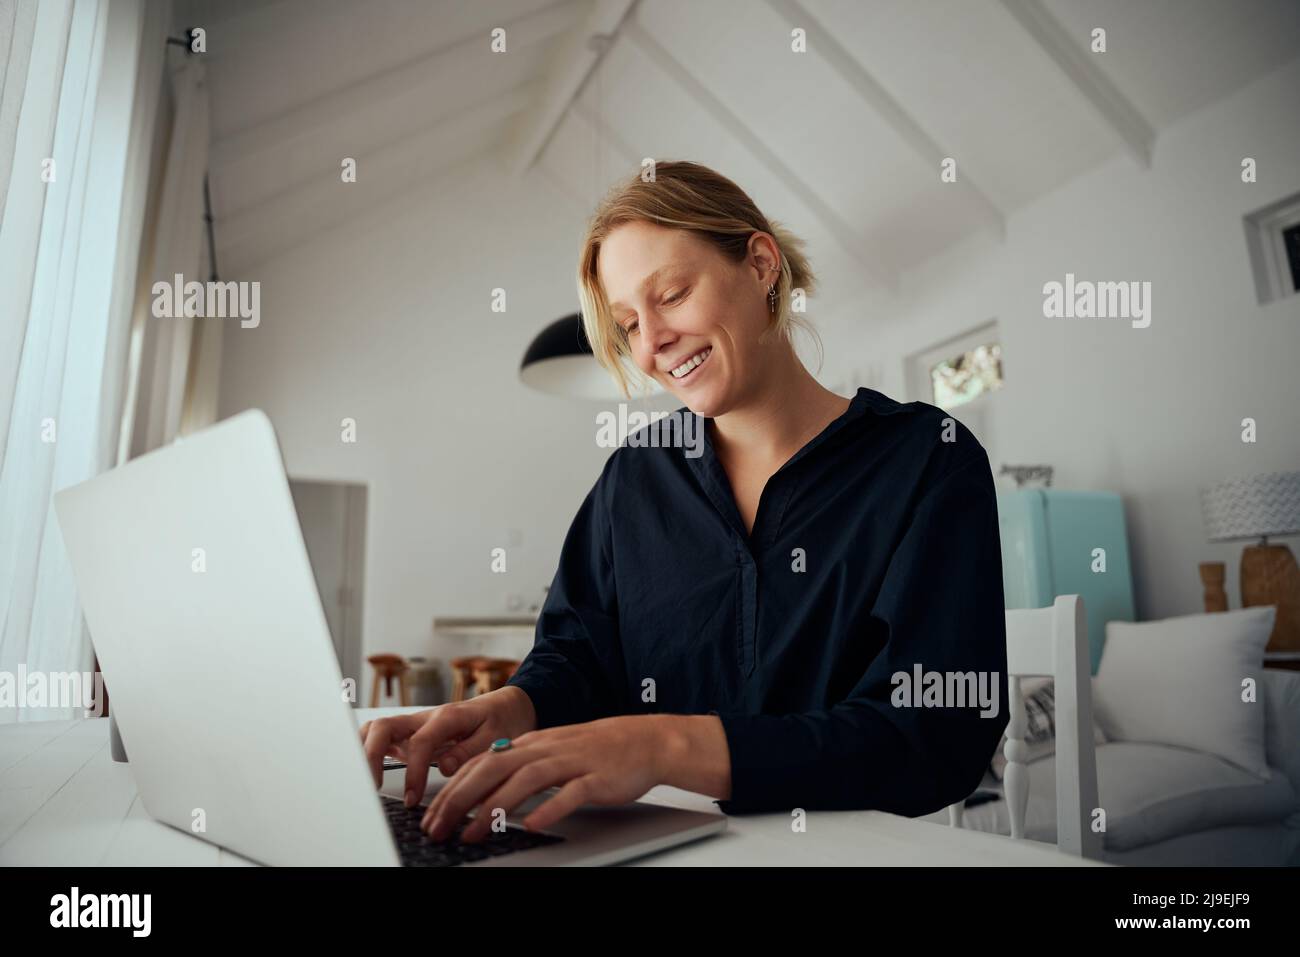 Caucasian female business woman working from home on laptop Stock Photo